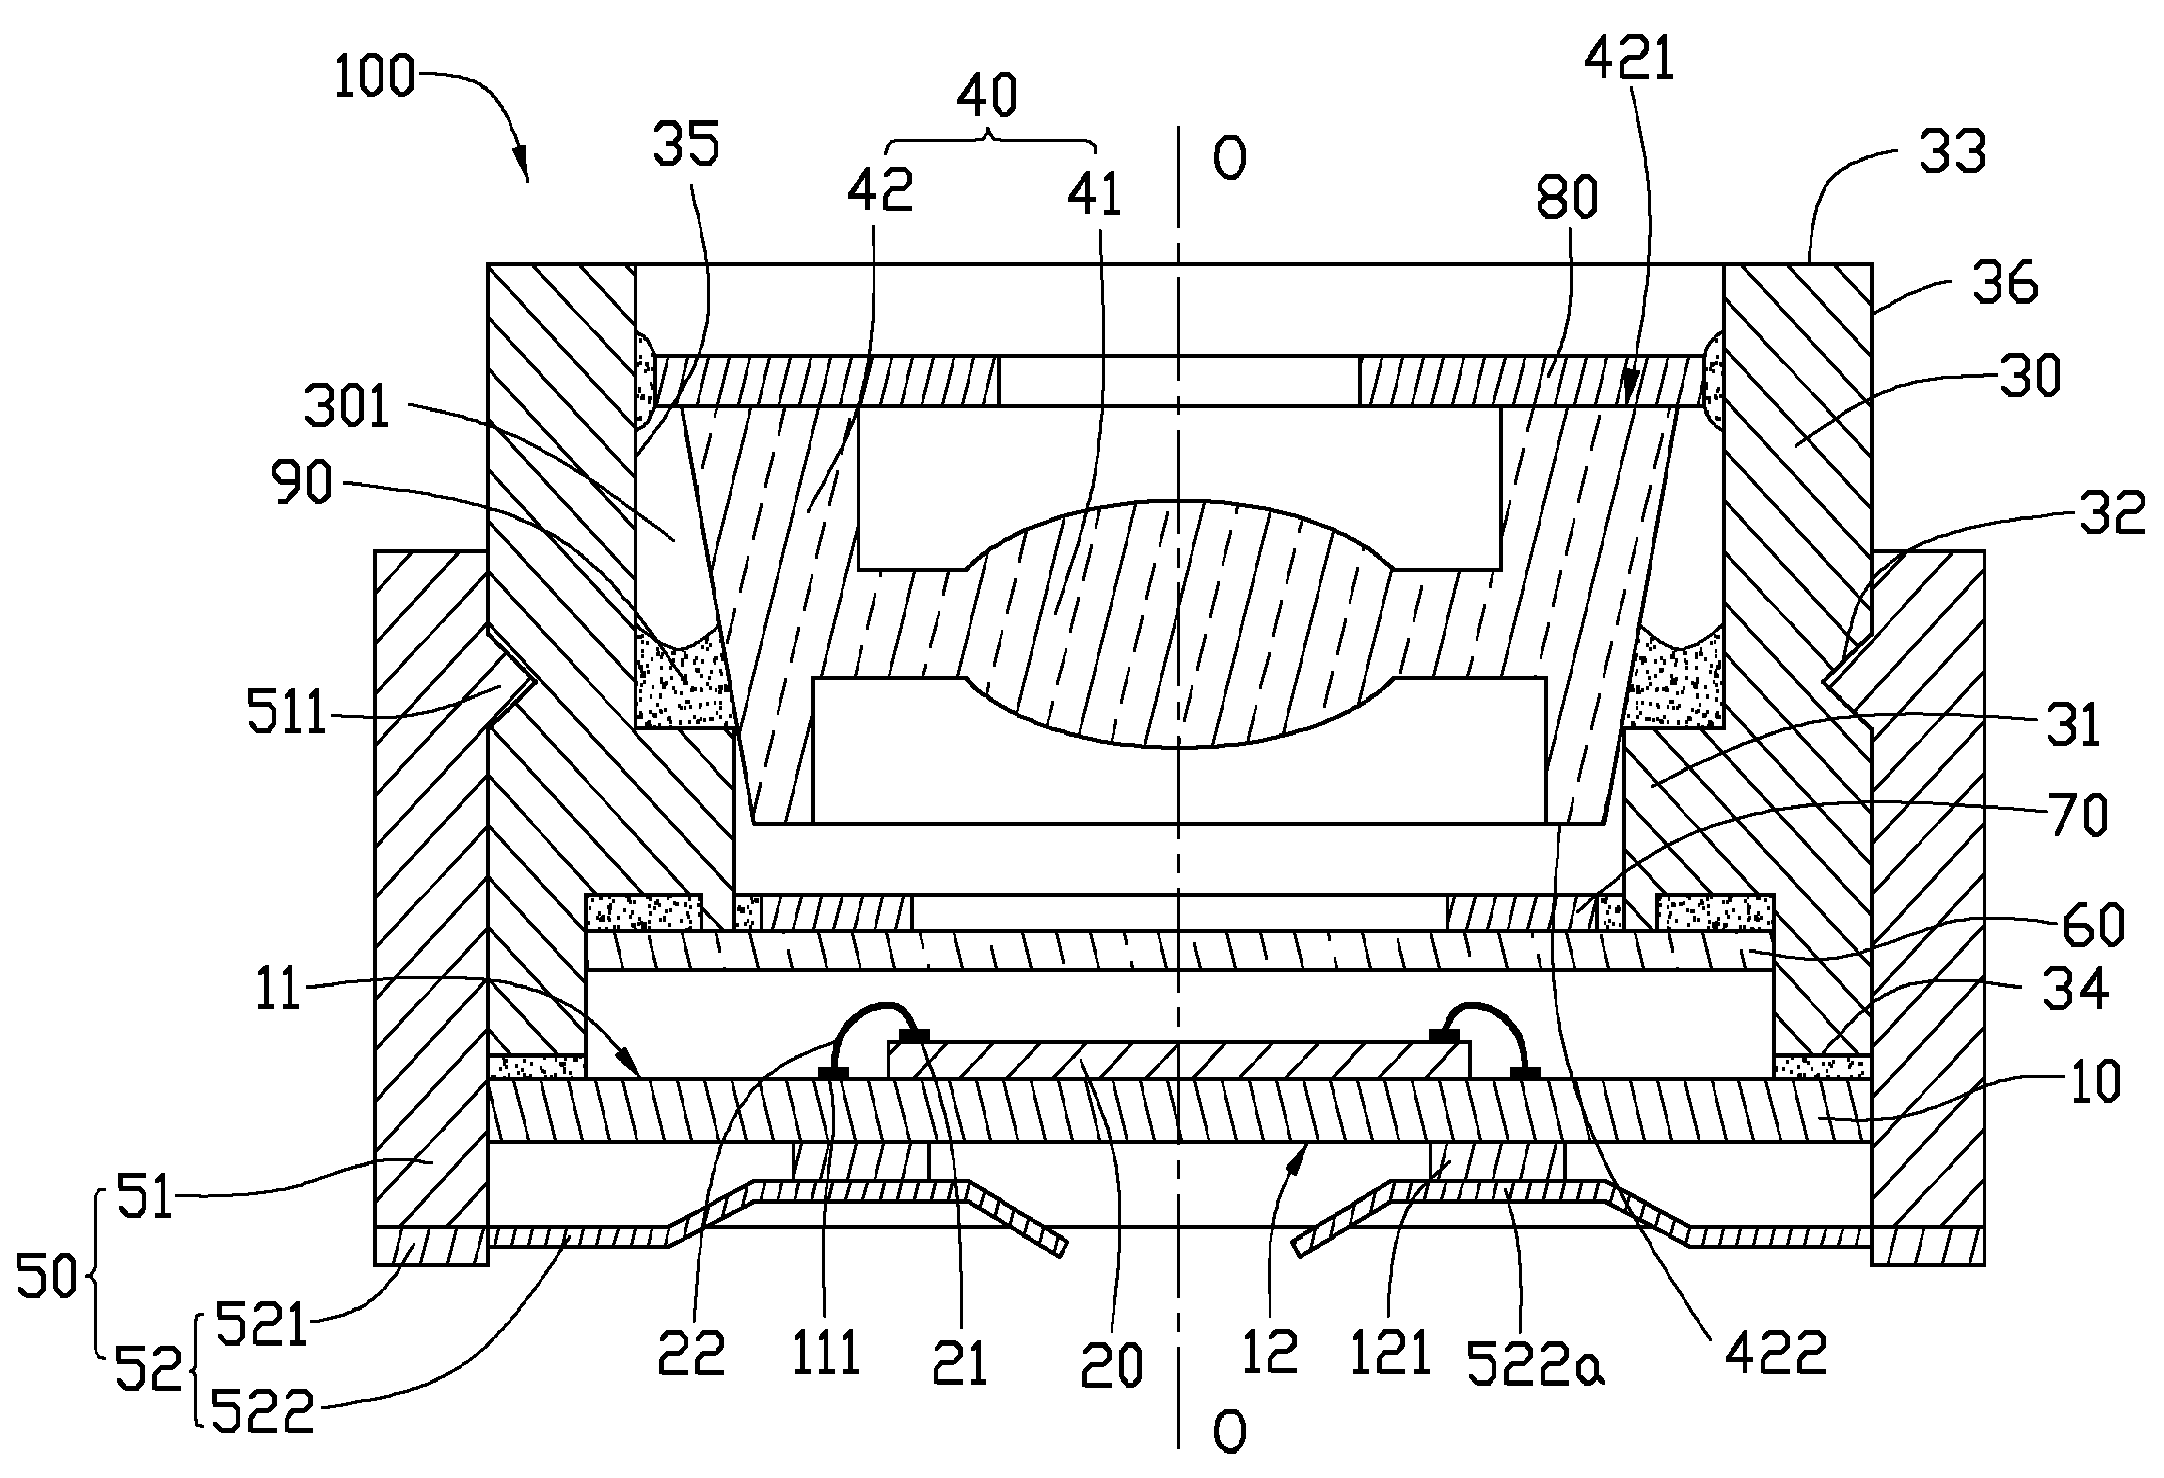 Optical imaging module with fixed-focus lens